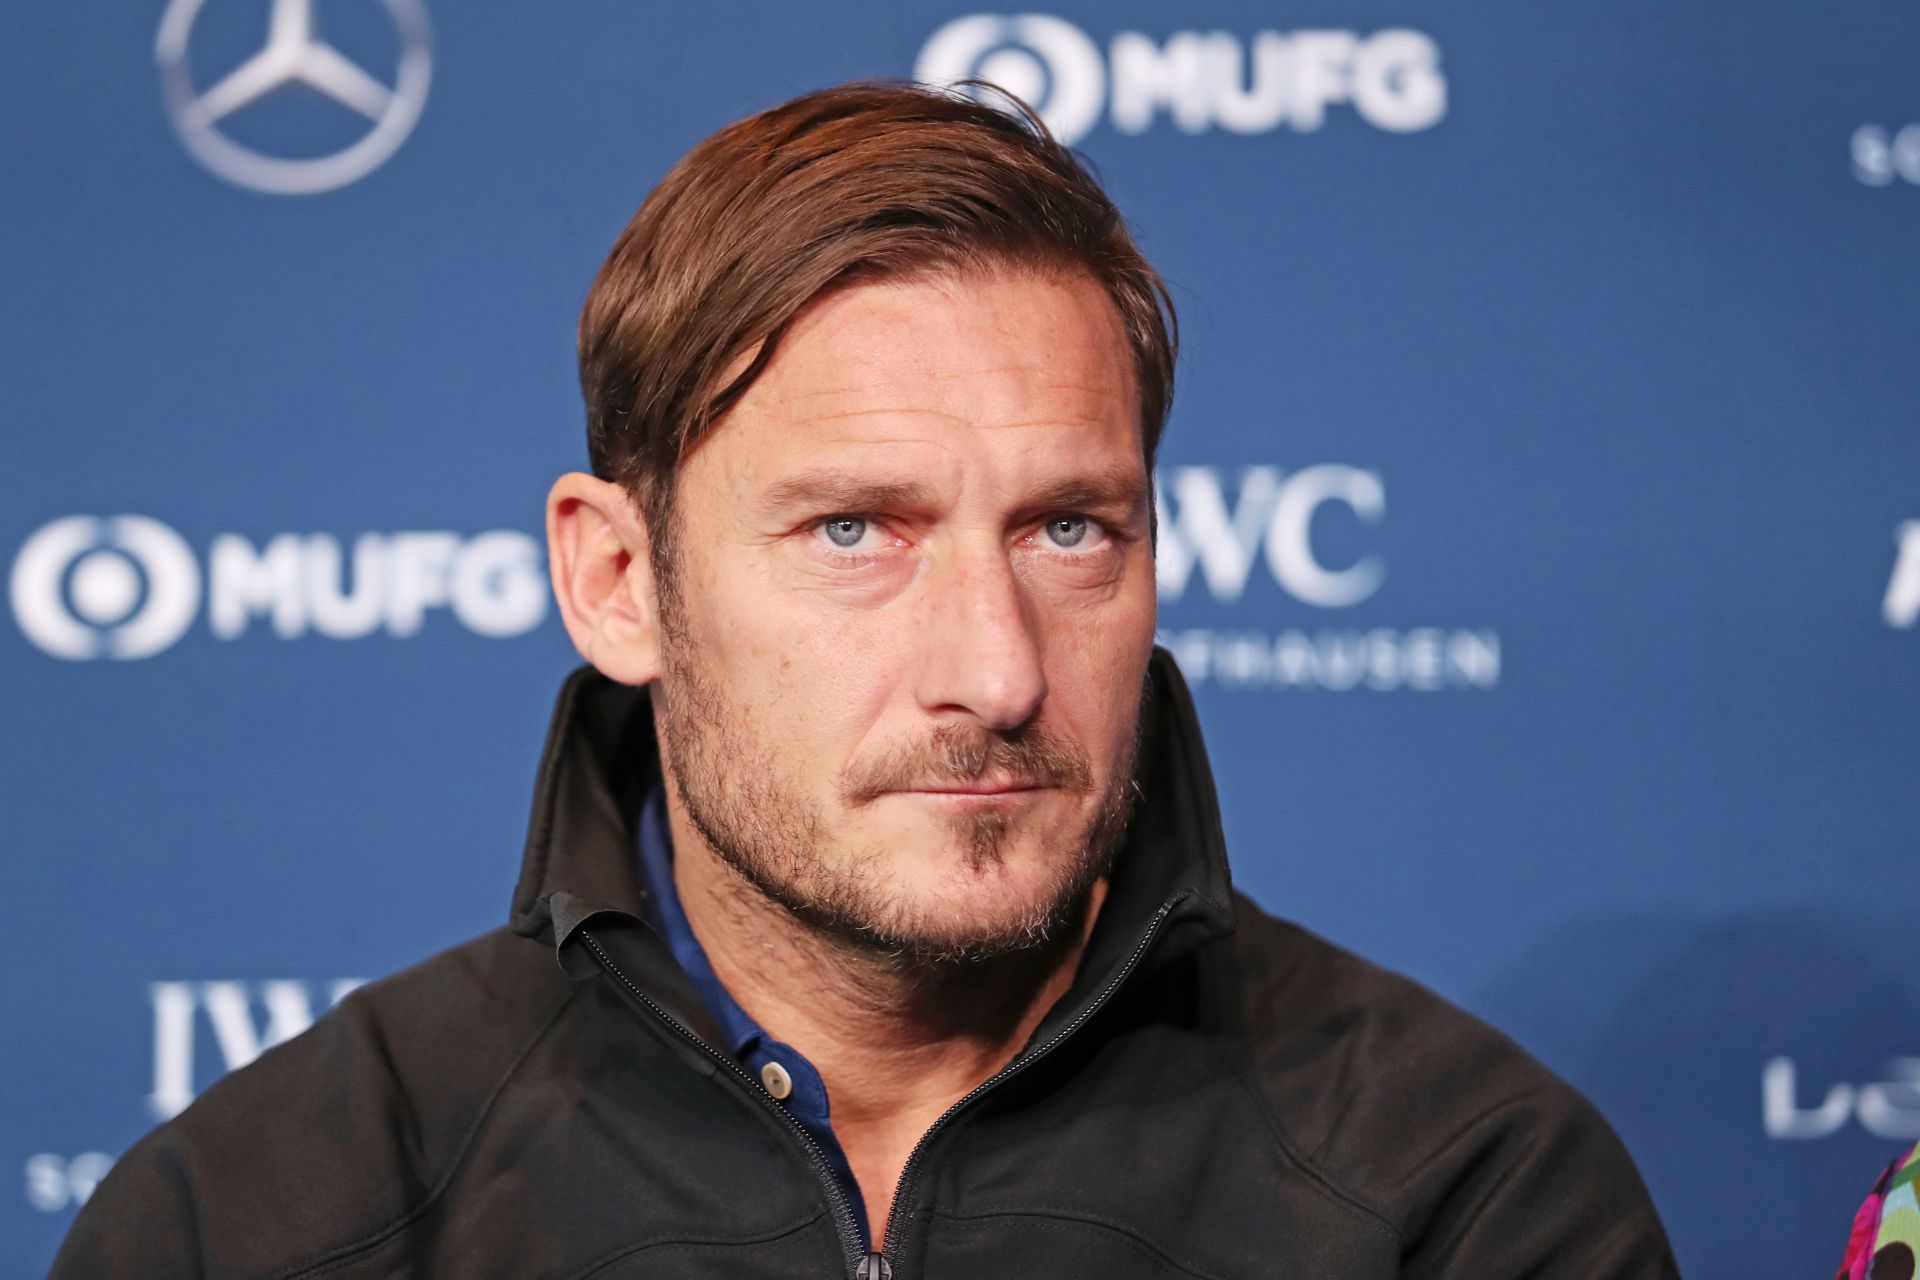 Francesco Totti has revealed that he might have left AS Roma for Real Madrid.